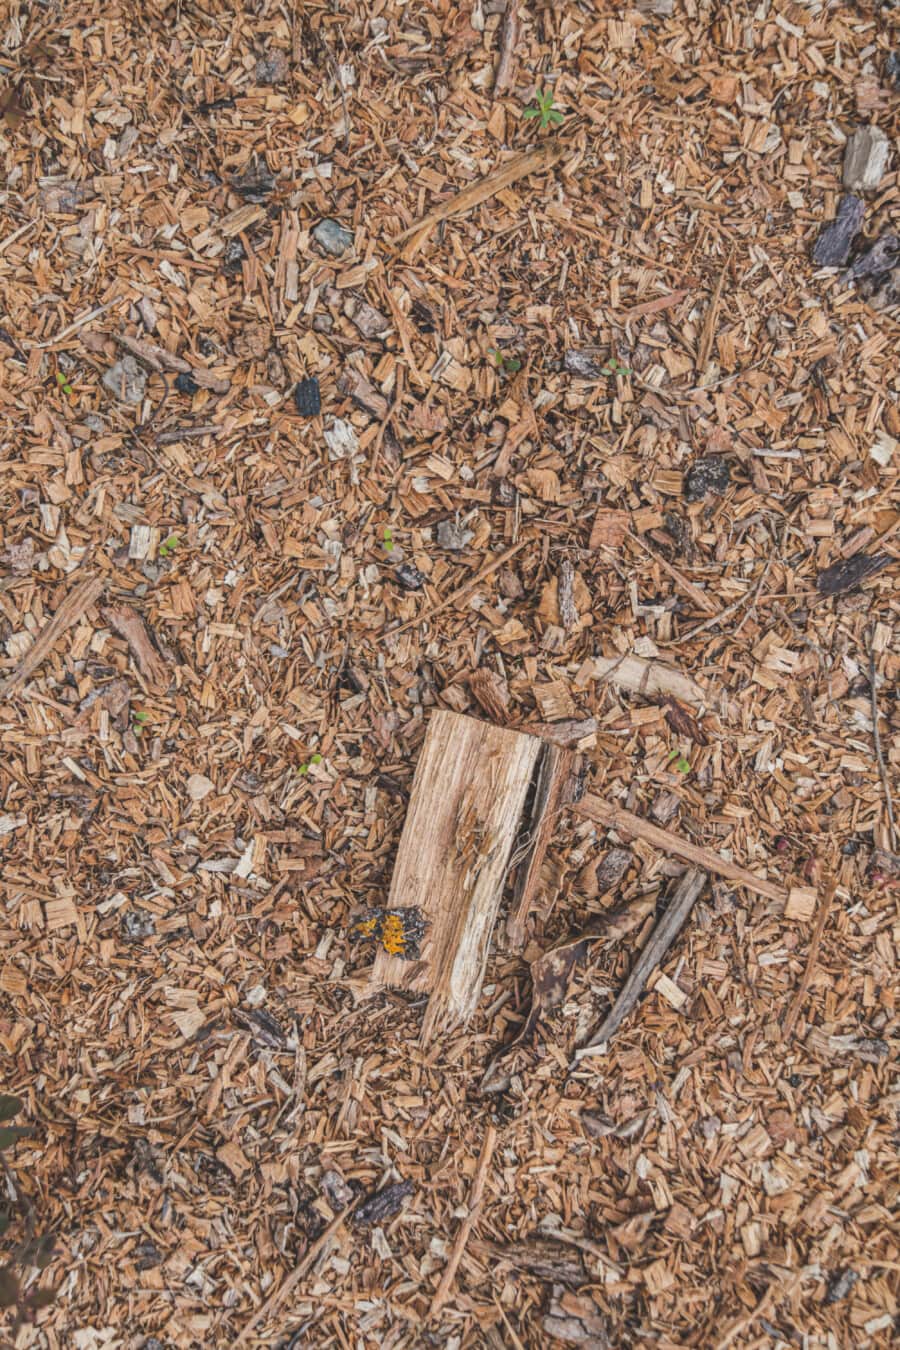 chunk, sawdust, wood splitting, dry, ground, compost, texture, pile, industry, pattern